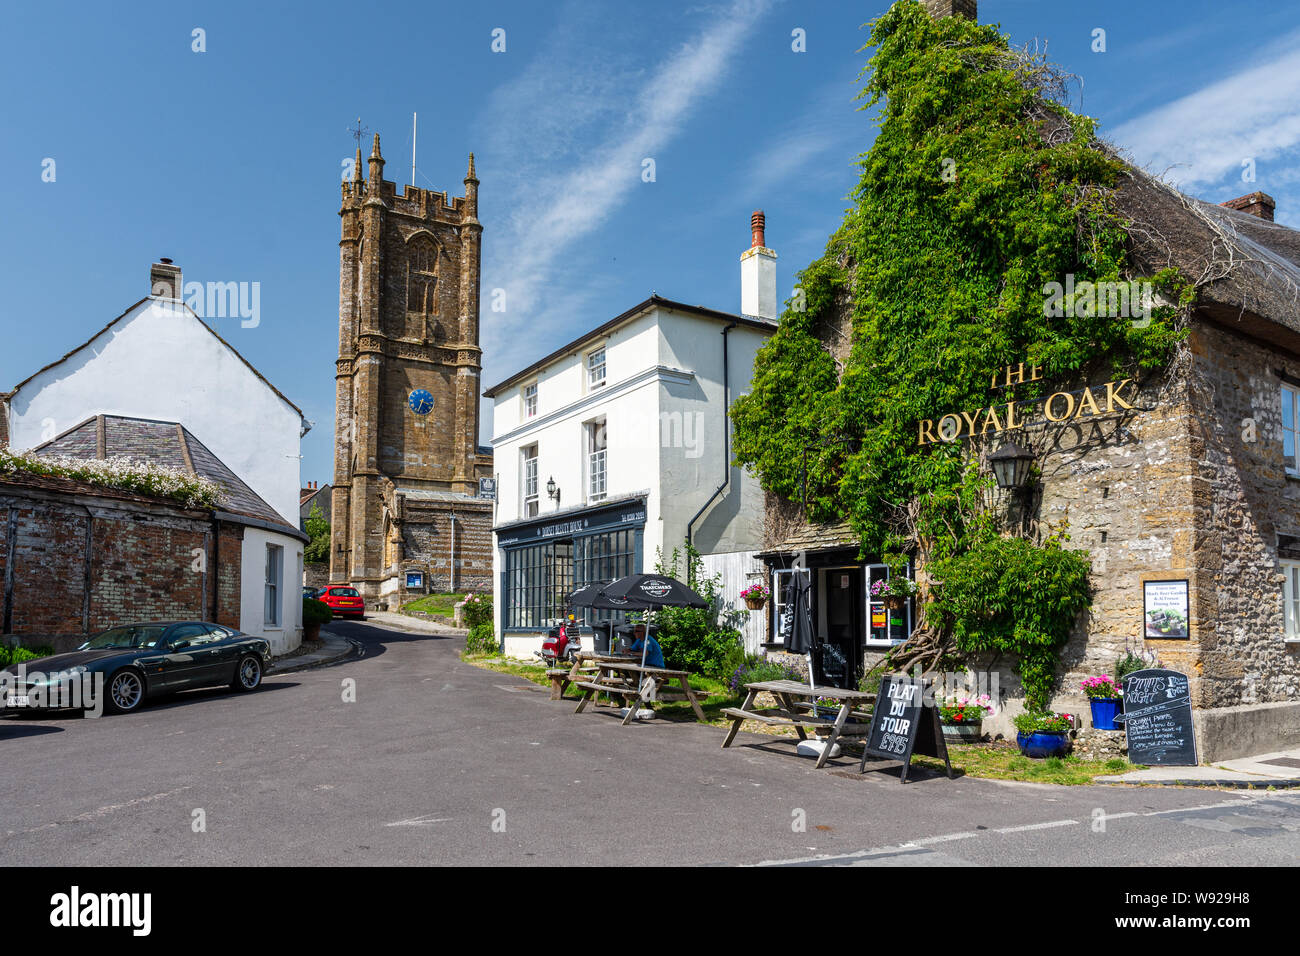 Cerne Abbas, England, UK - June 29, 2019: A man drinks outside The Royal Oak pub in the village of Cerne Abbas, with St Mary's Church behind. Stock Photo